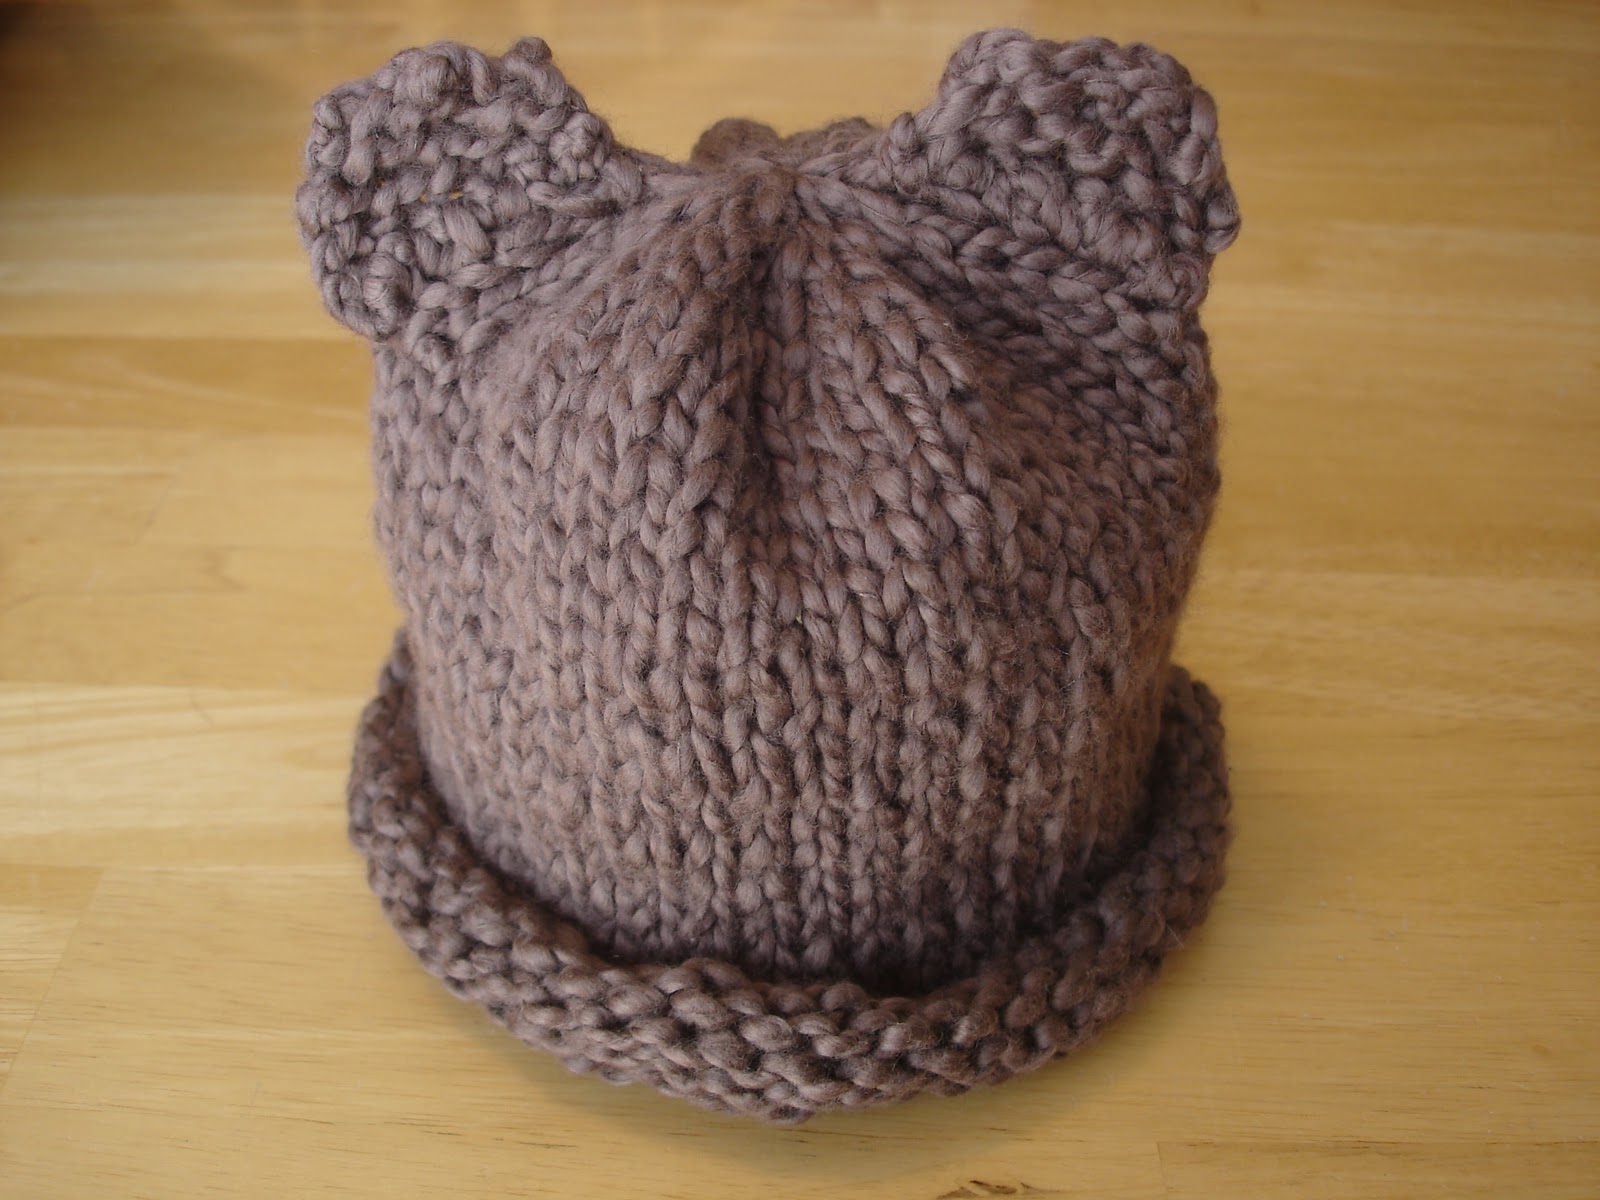 45 Free Knitting Patterns for a Beanie | Guide Patterns